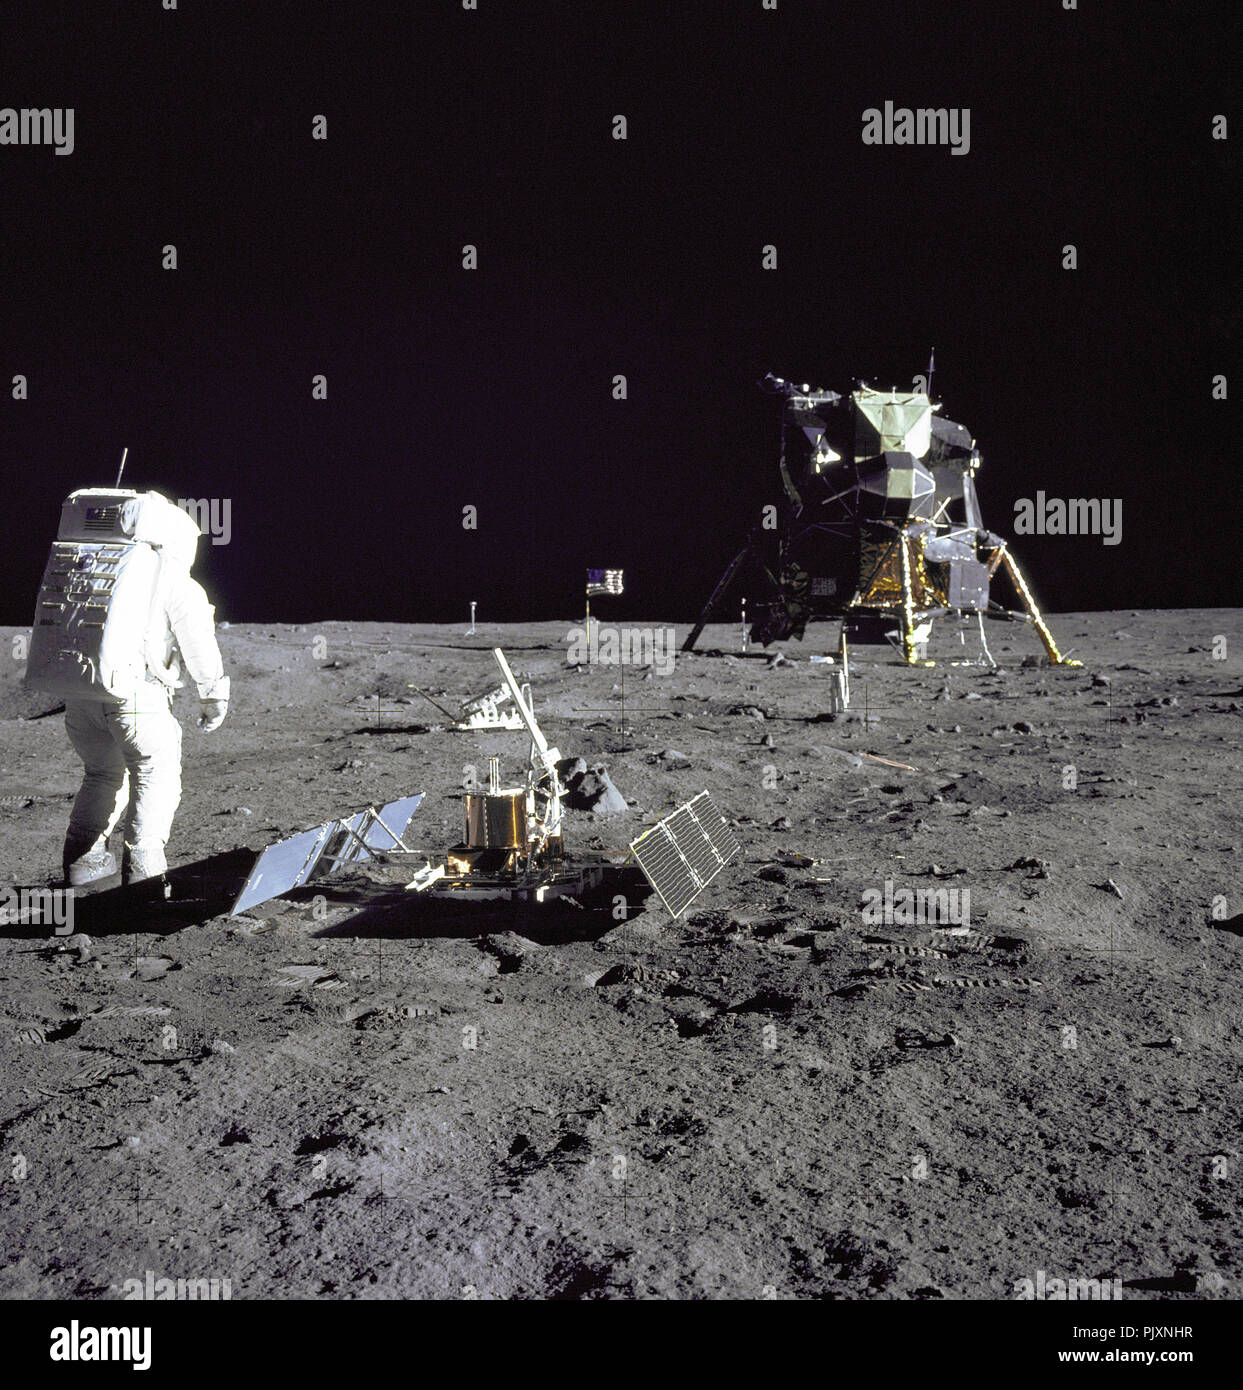 The Moon - (FILE) -  Astronaut Edwin E.'Buzz' Aldrin Jr., Lunar Module pilot, is photographed during the Apollo 11 extravehicular activity on the Moon on Sunday, July 20, 1969. He has just deployed the Early Apollo Scientific Experiments Package (EASEP). In the foreground is the Passive Seismic Experiment Package (PSEP); beyond it is the Laser Ranging Retro-Reflector (LR-3); in the center background is the United States flag; in the left background is the black and white lunar surface television camera; in the far right background is the Lunar Module 'Eagle'. Astronaut Neil A. Armstrong, comma Stock Photo